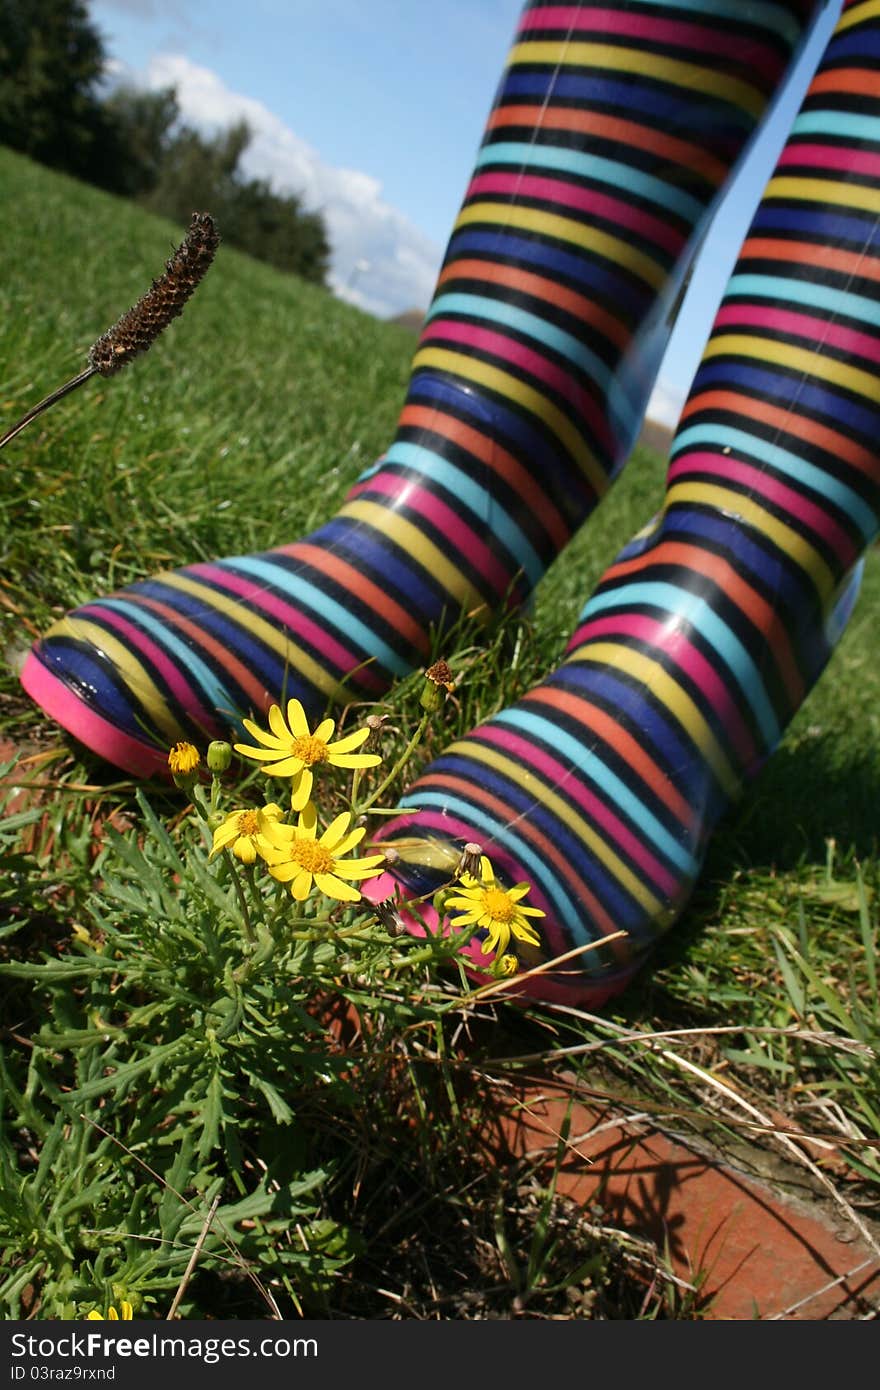 Stripy wellington boots among flowers and grass. Stripy wellington boots among flowers and grass